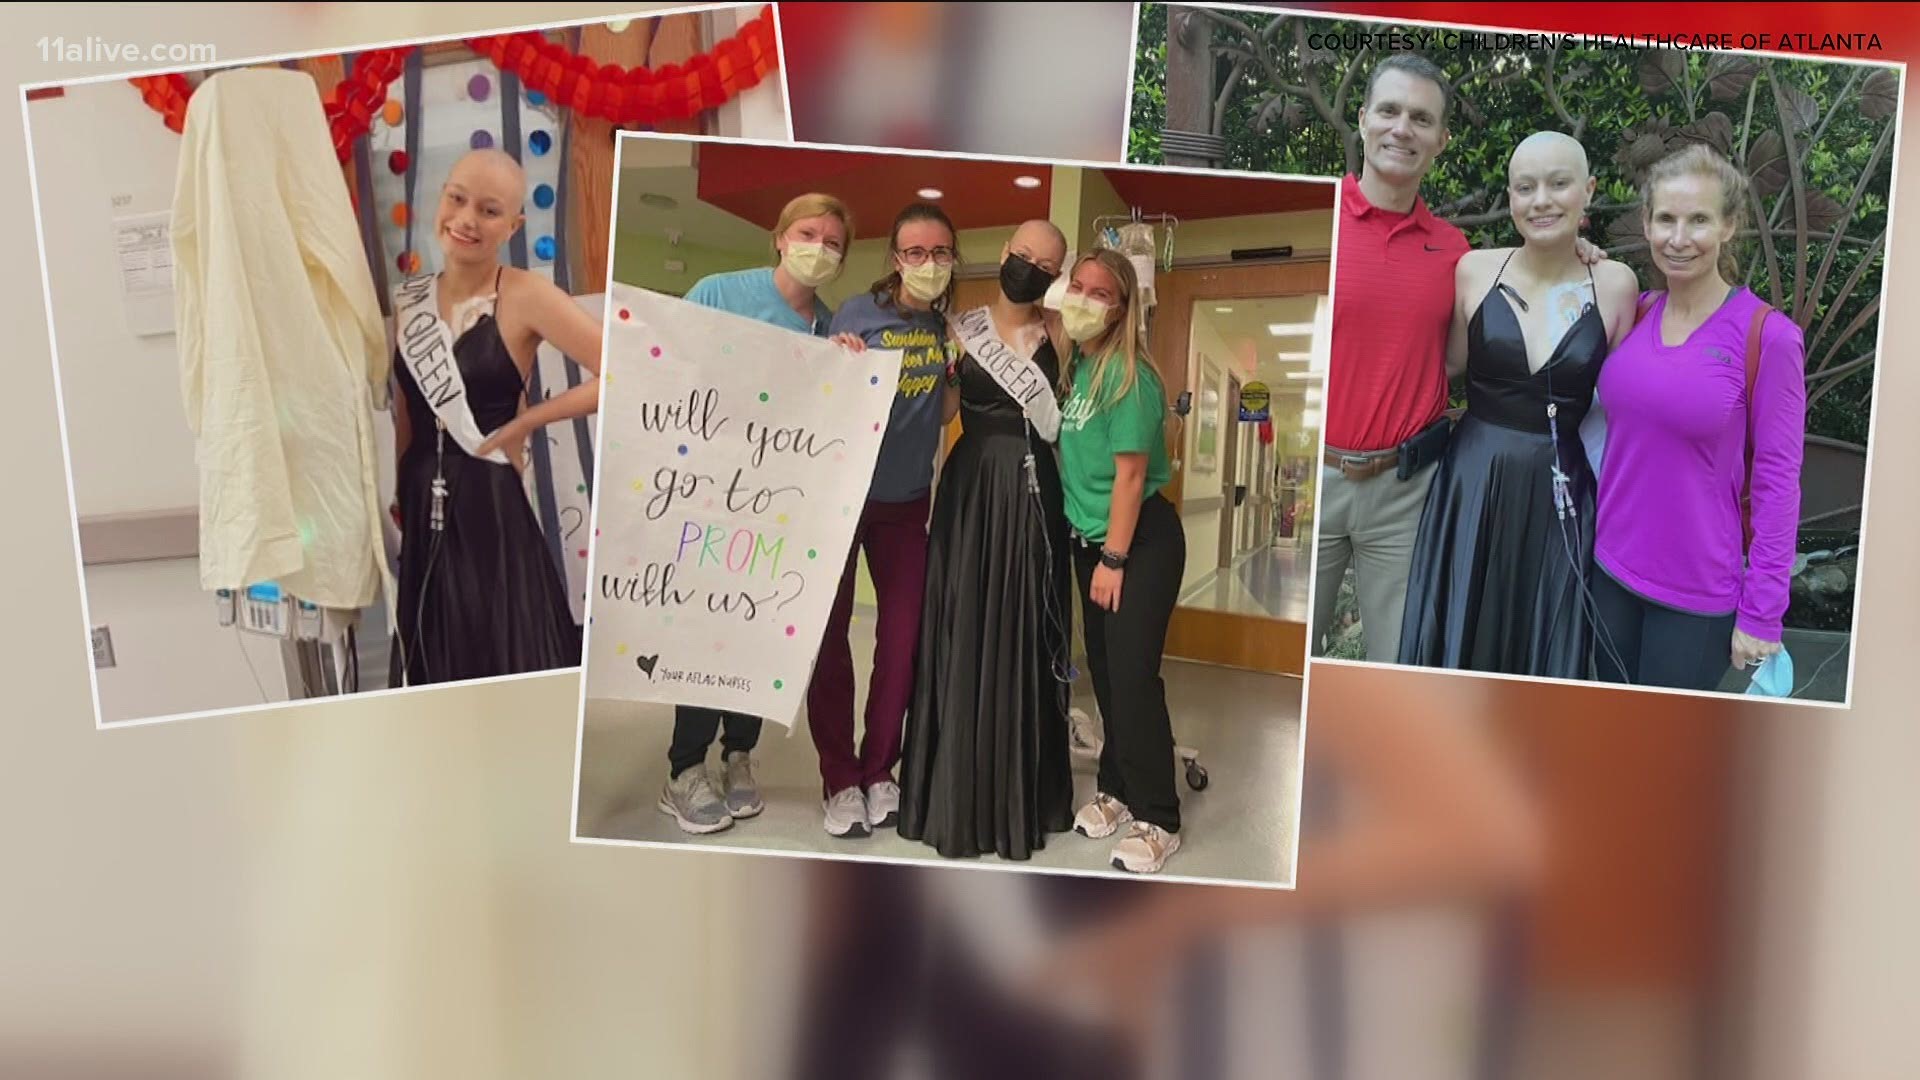 Faith Johnson desperately wanted to go to her senior prom, but leukemia treatment made it look like a no-go. So CHOA nurses stepped in to fill the void.